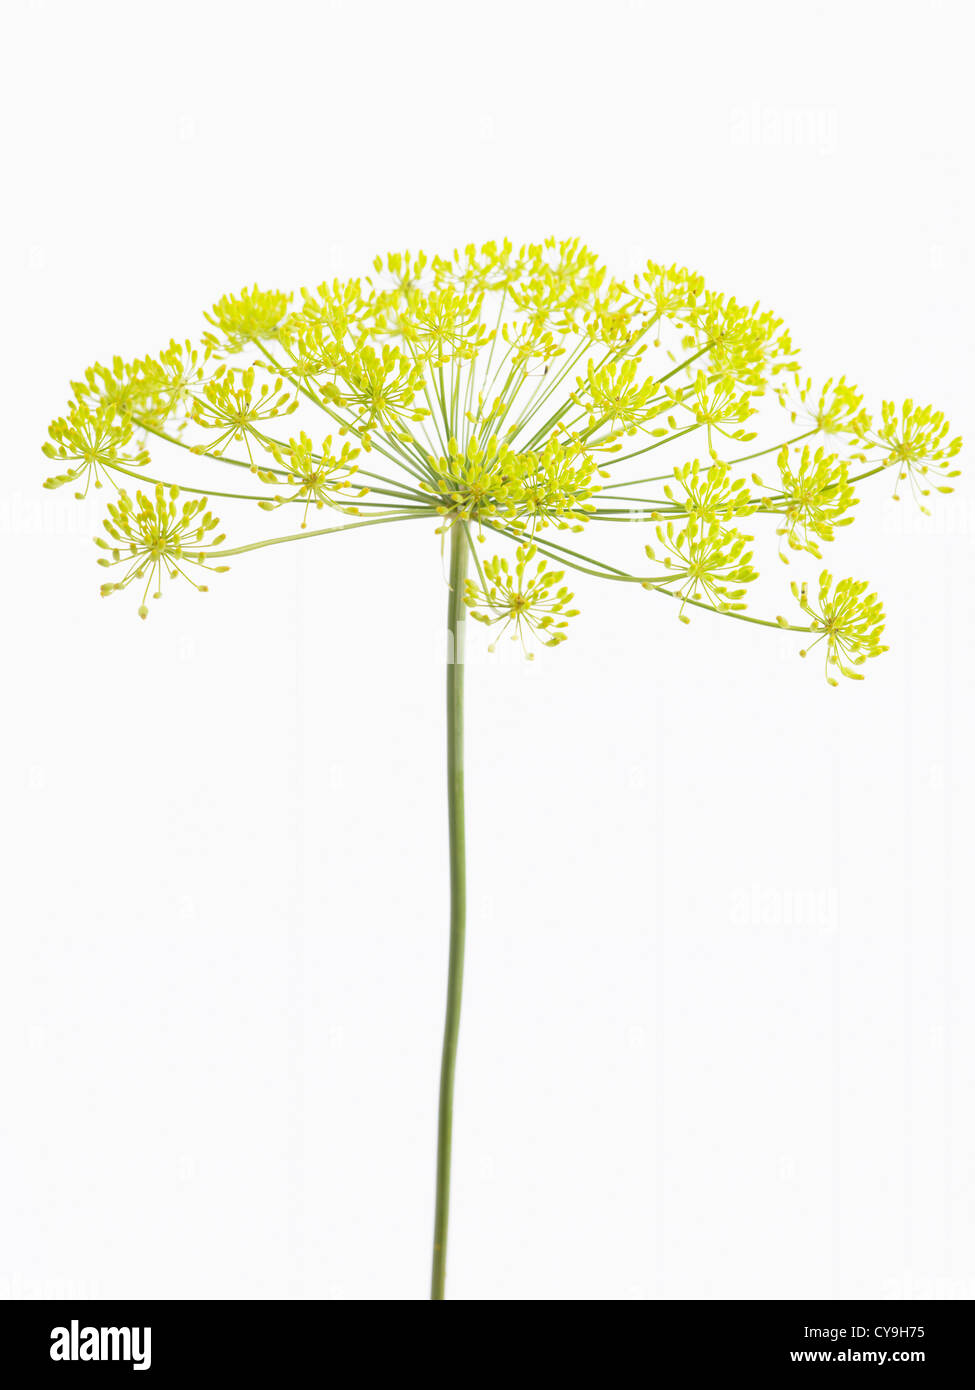 Anethum graveolens, Dill, Yellow flowers in an umbrella shape at the top of a single stem against a white background. Stock Photo